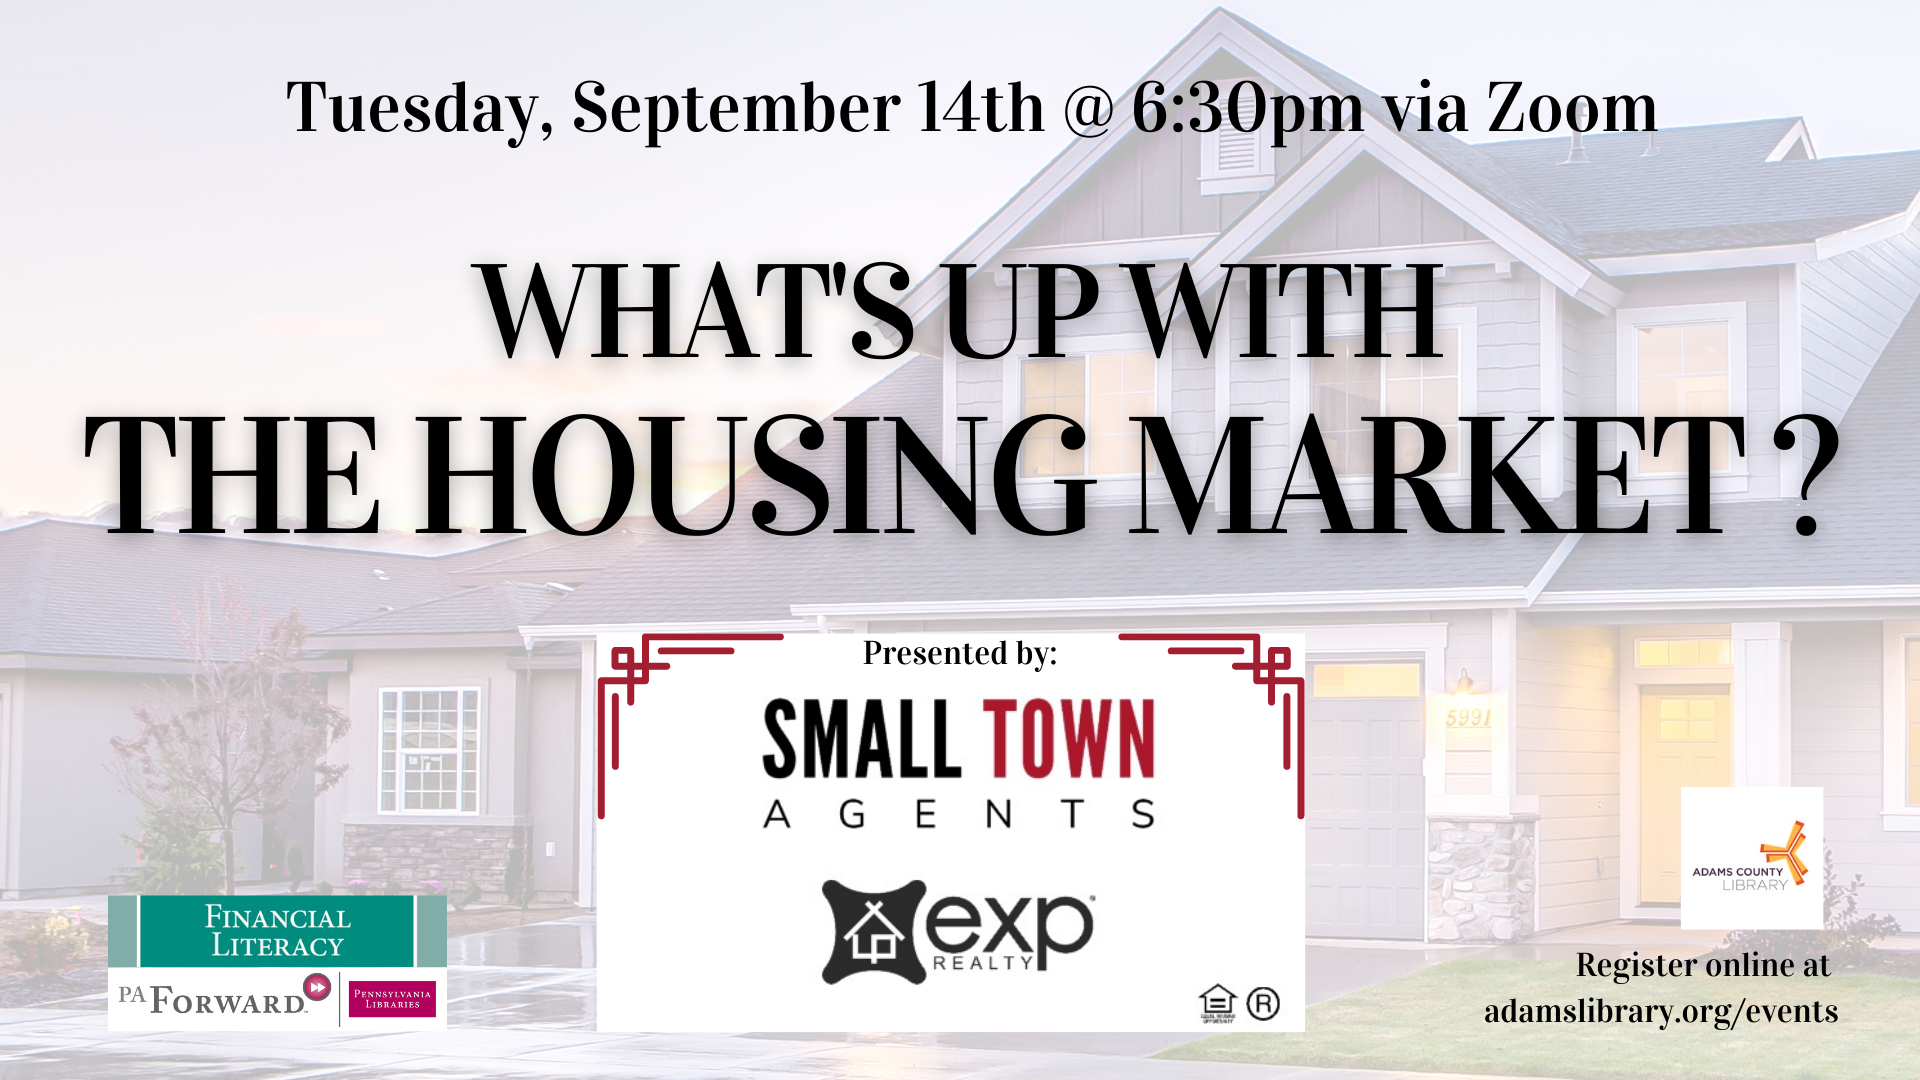 Join us for What's Up With the Housing Market presented by Small Town Agents and eXp Realty on Tuesday, September 14, 2021 at 6:30pm via Zoom.